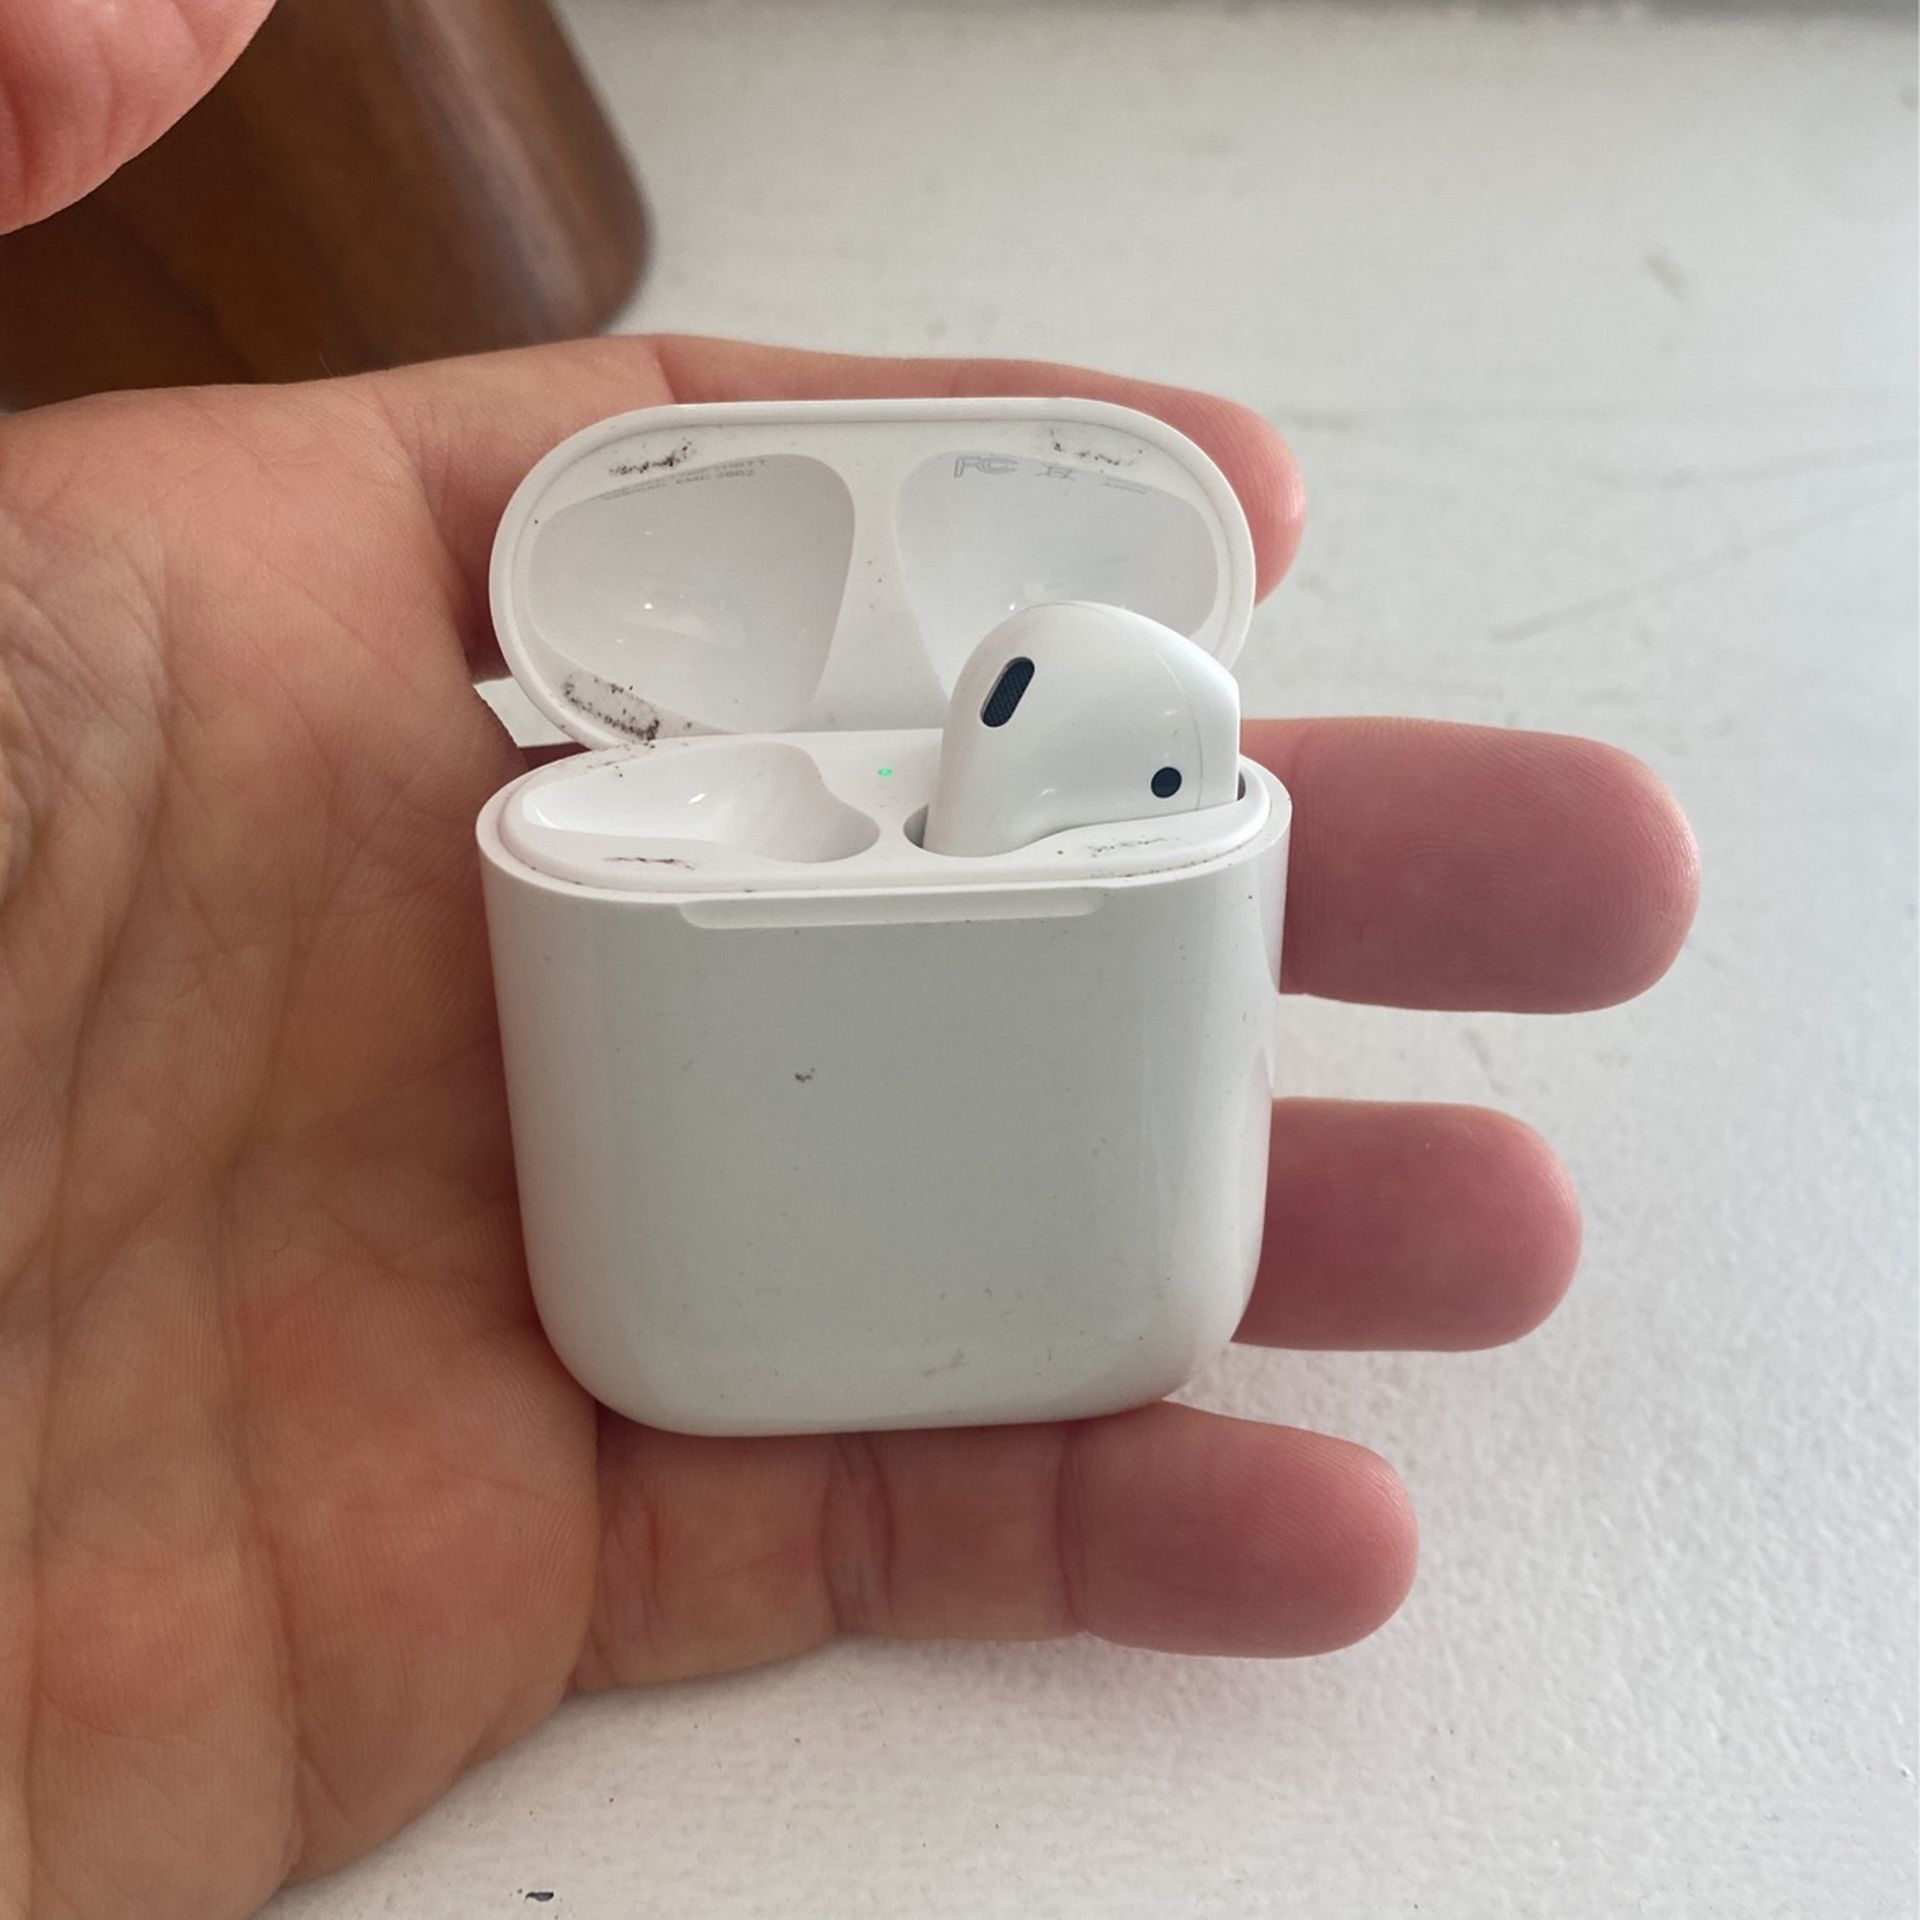 Apple AirPod (missing Left Side) And Charging Case